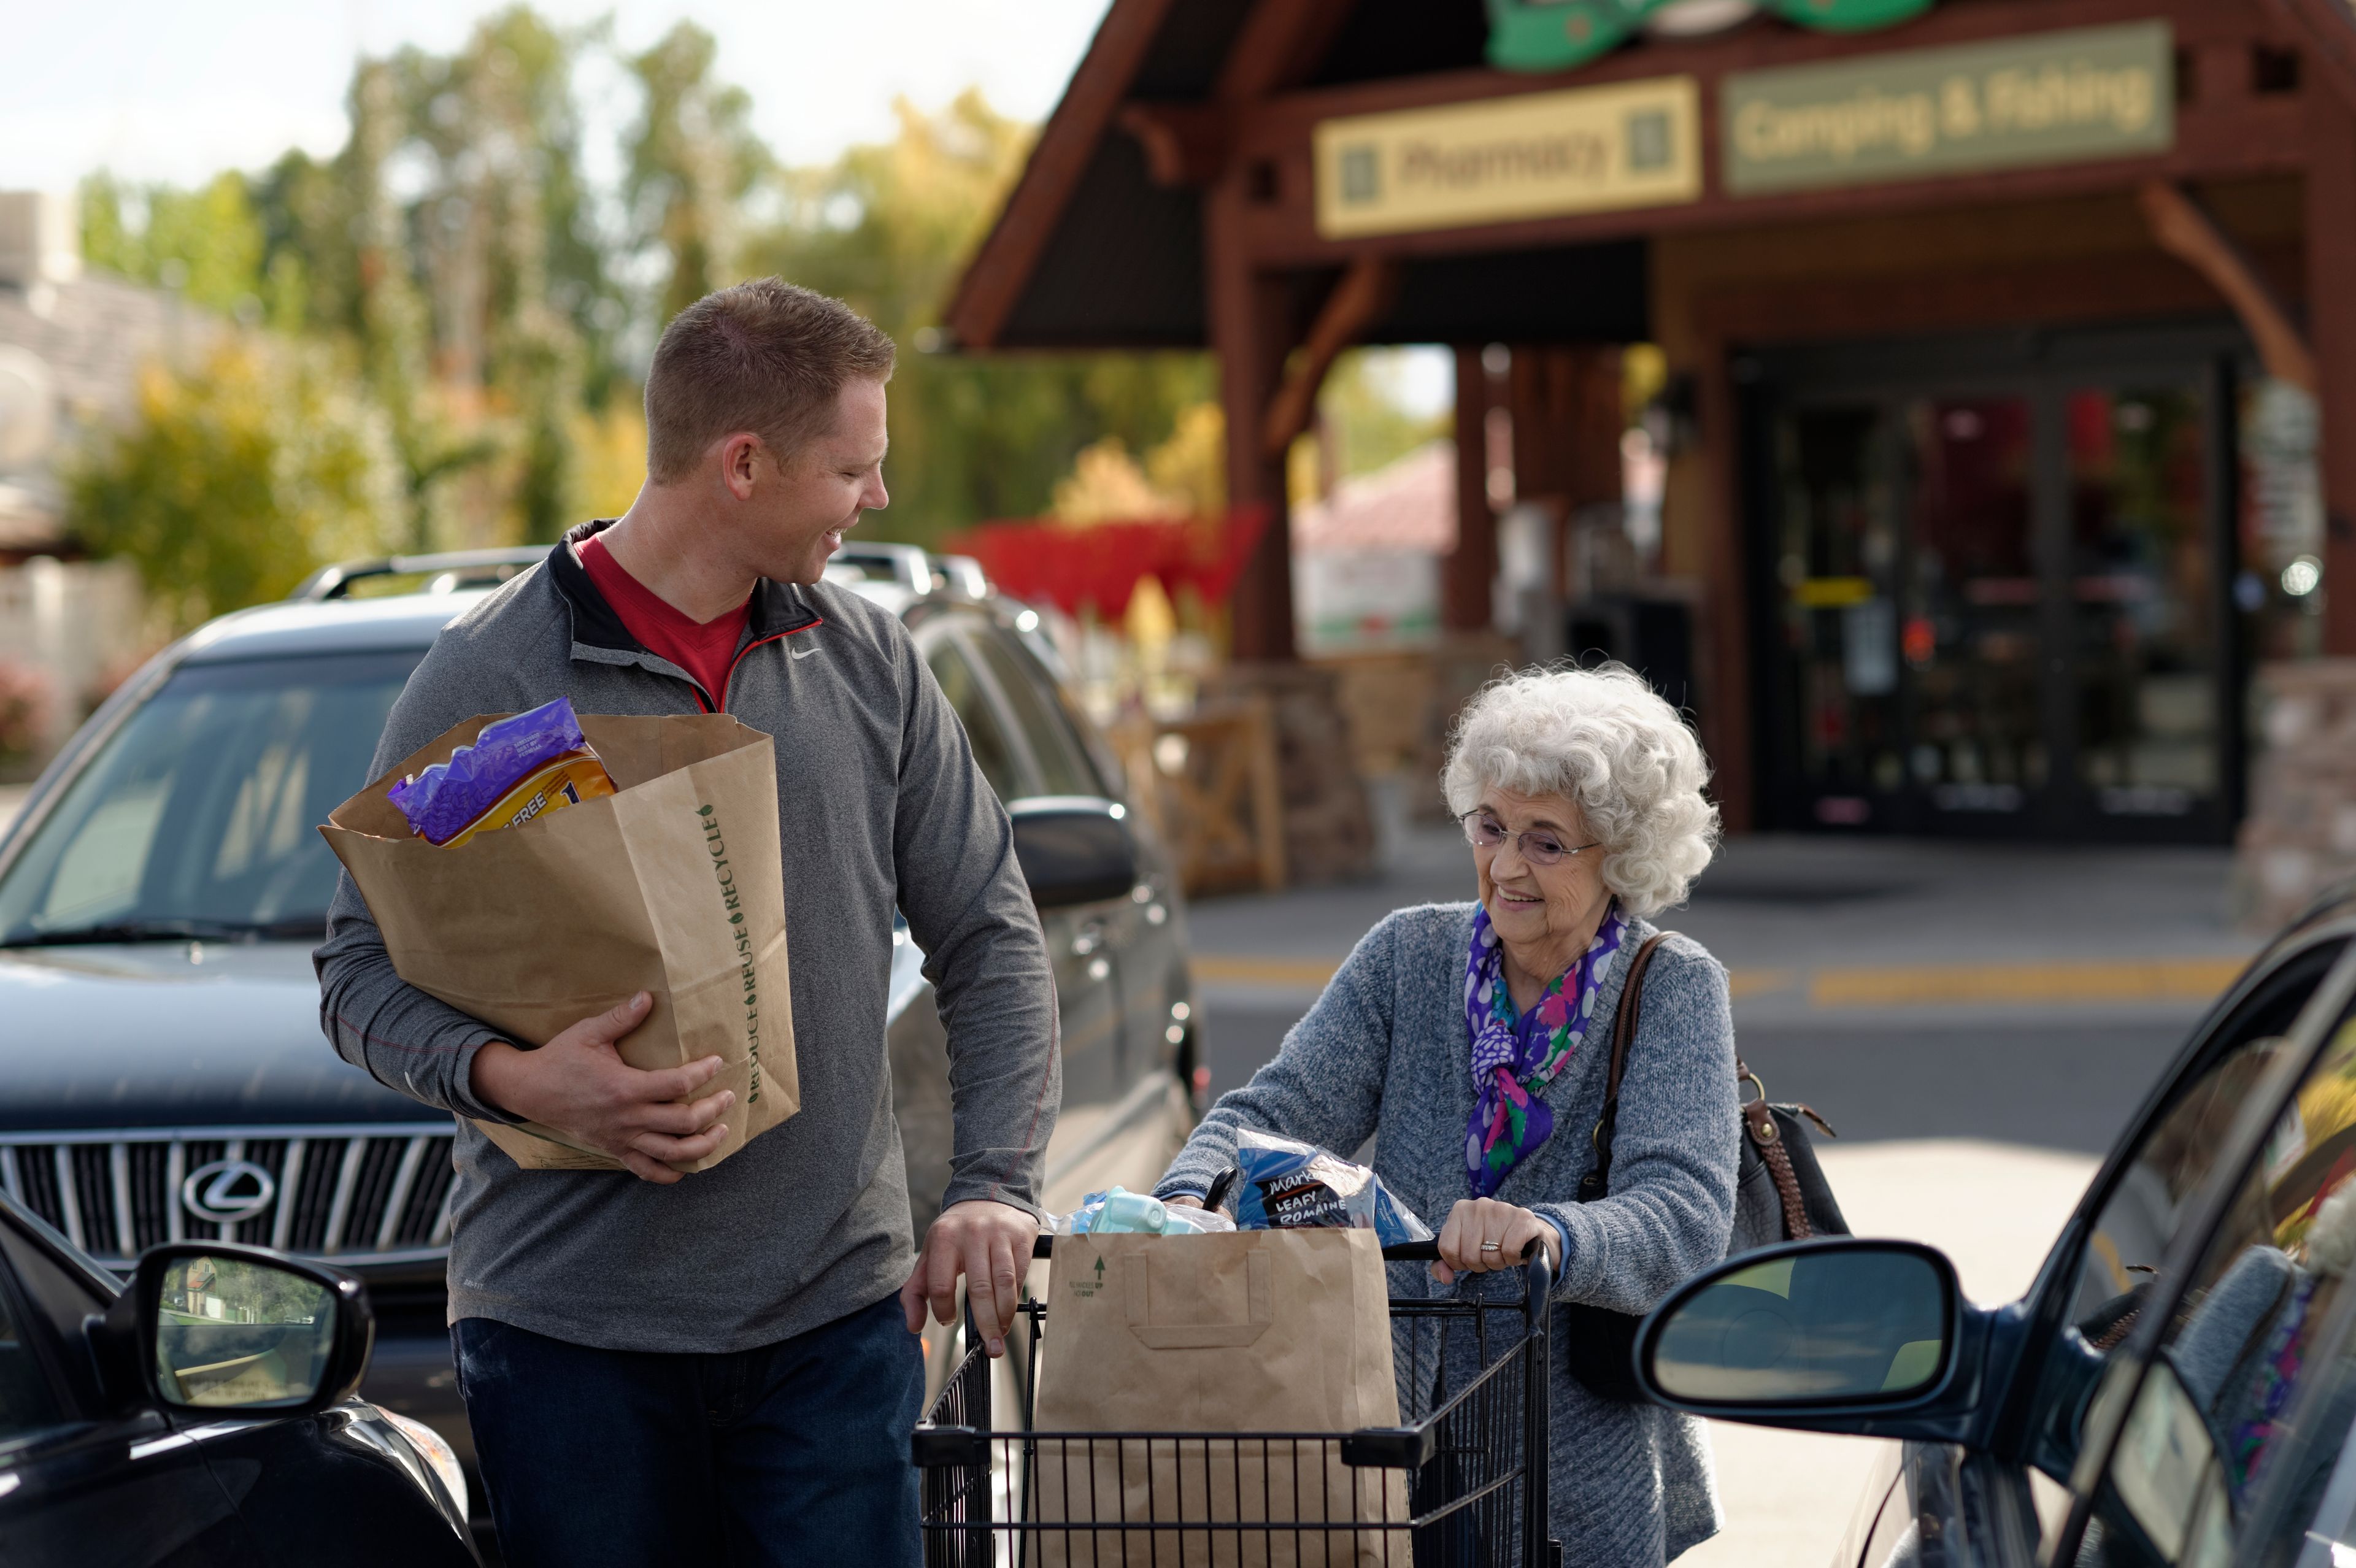 A young man helps an elderly woman carry groceries out to her car.  